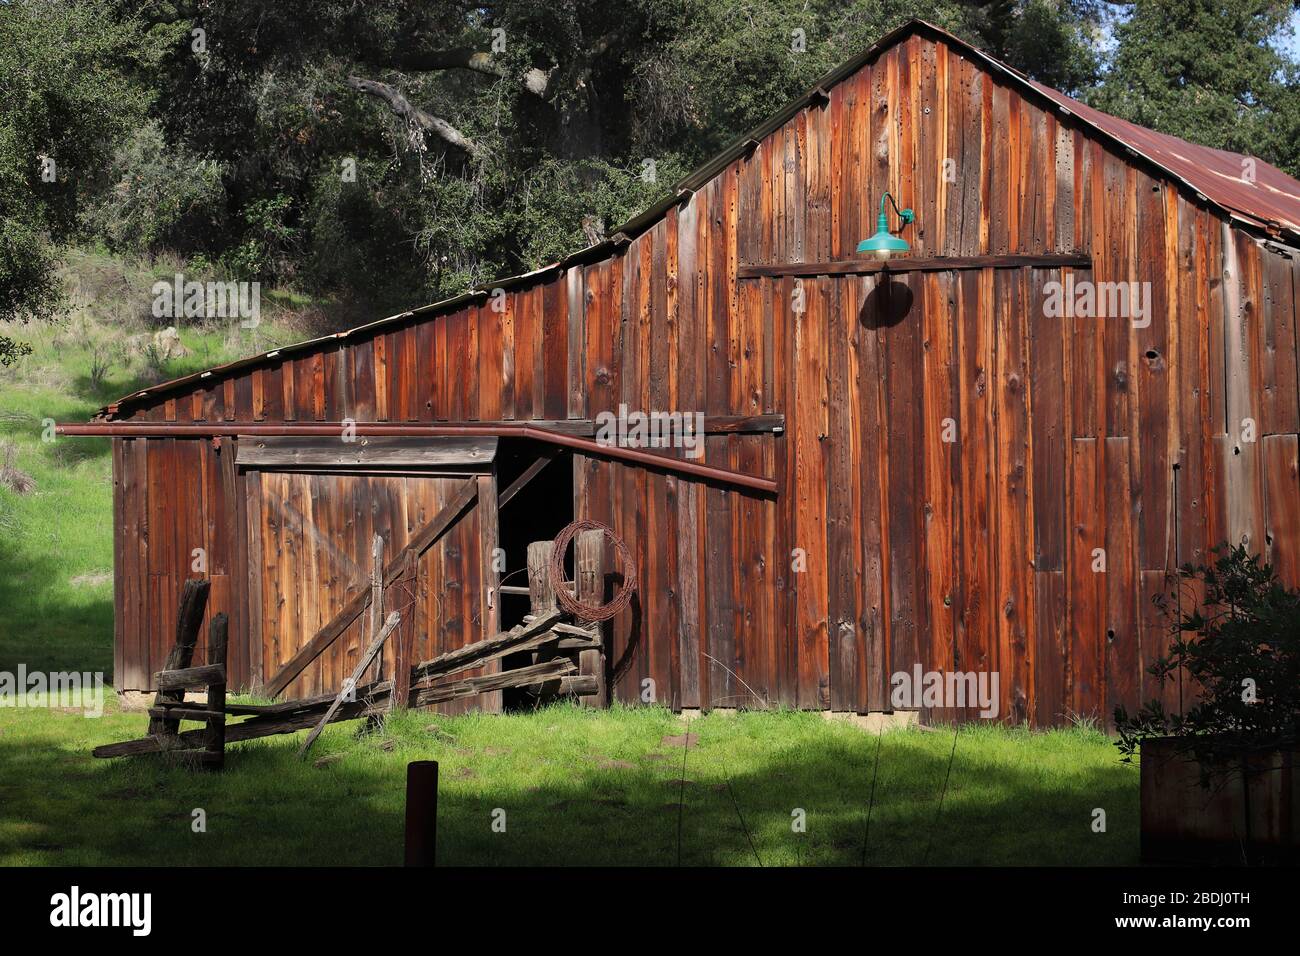 Old redwood barn, built with hand hewn redwood planks in the 1880's, in sunlight, some green grass, in the Daley Ranch Preserve, Escondido, California Stock Photo